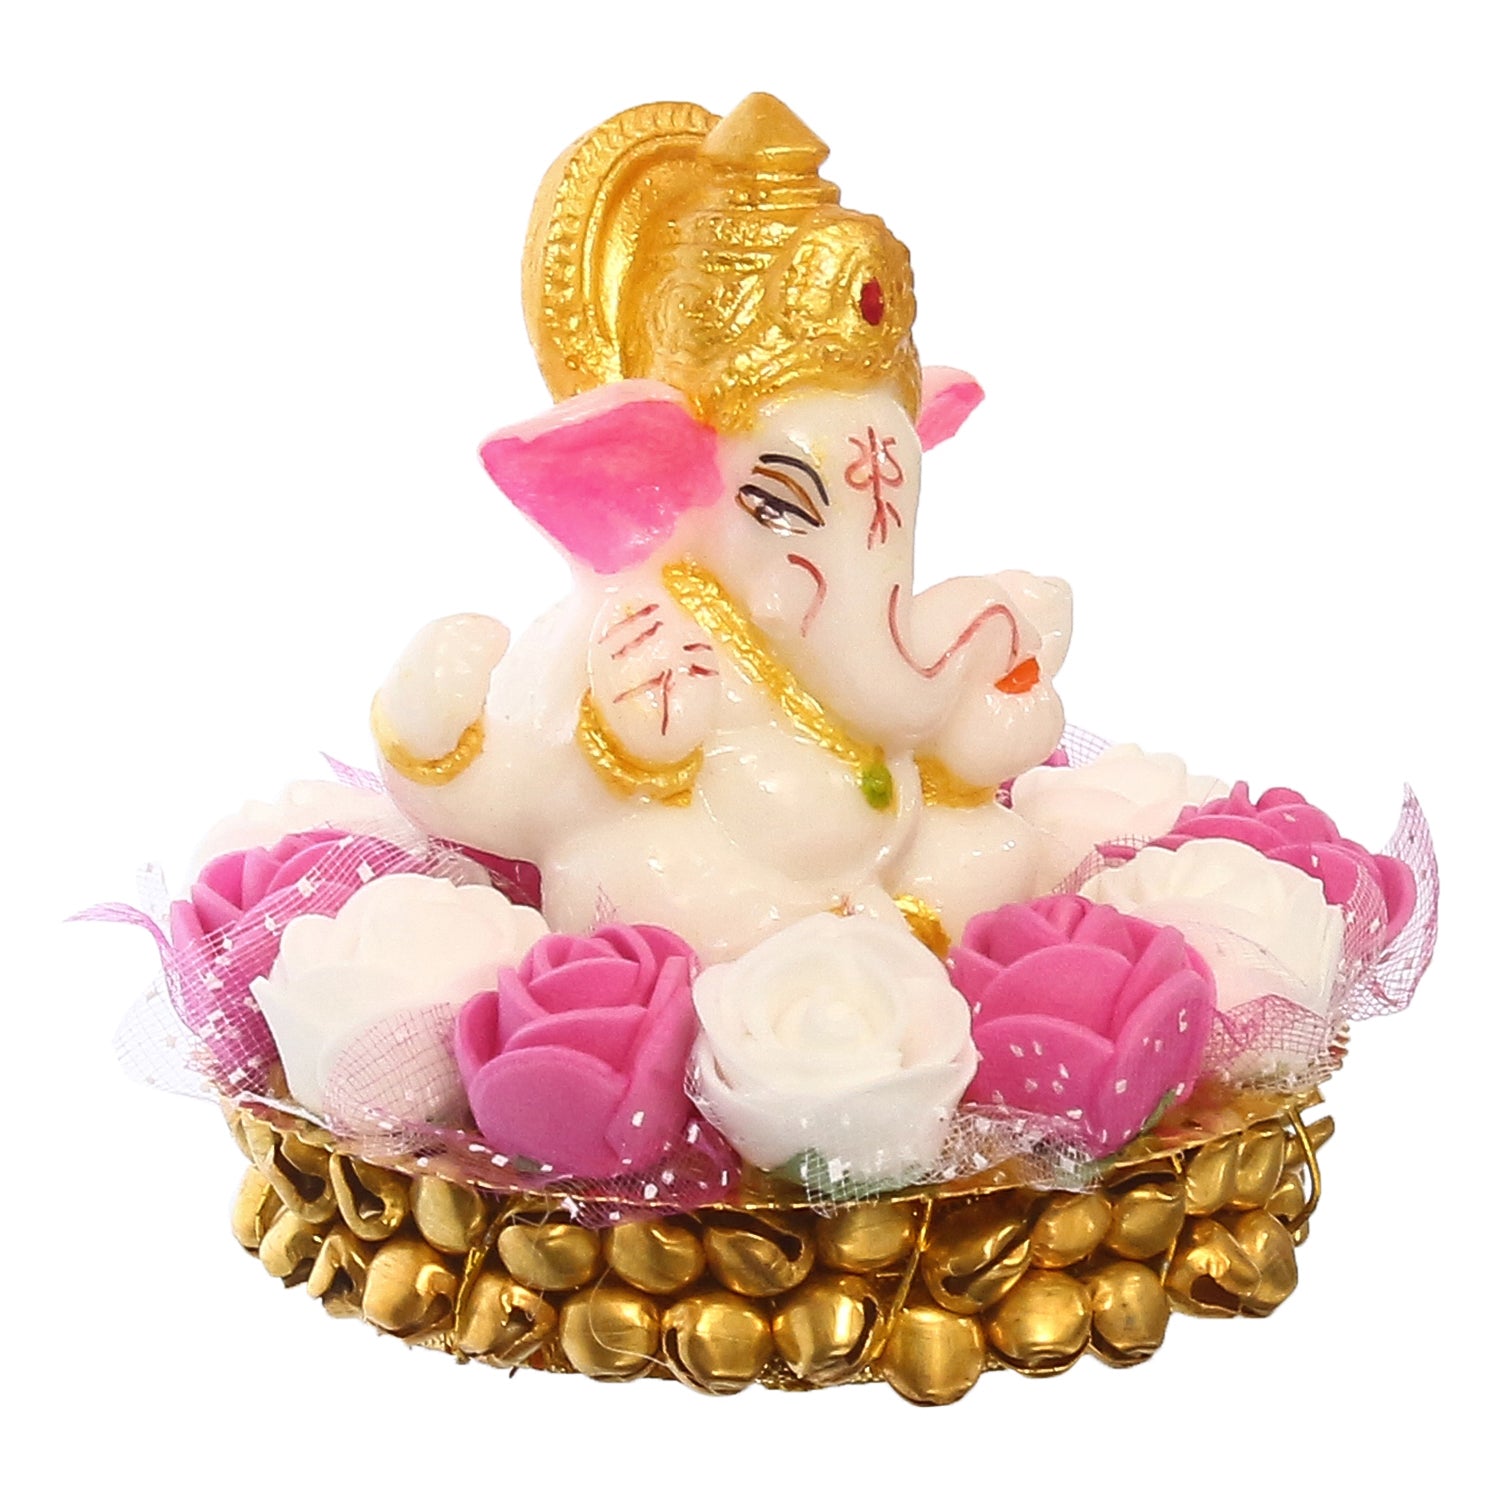 Golden and White Polyresin Lord Ganesha Idol on Decorative Handcrafted Plate with Pink and White Flowers 4